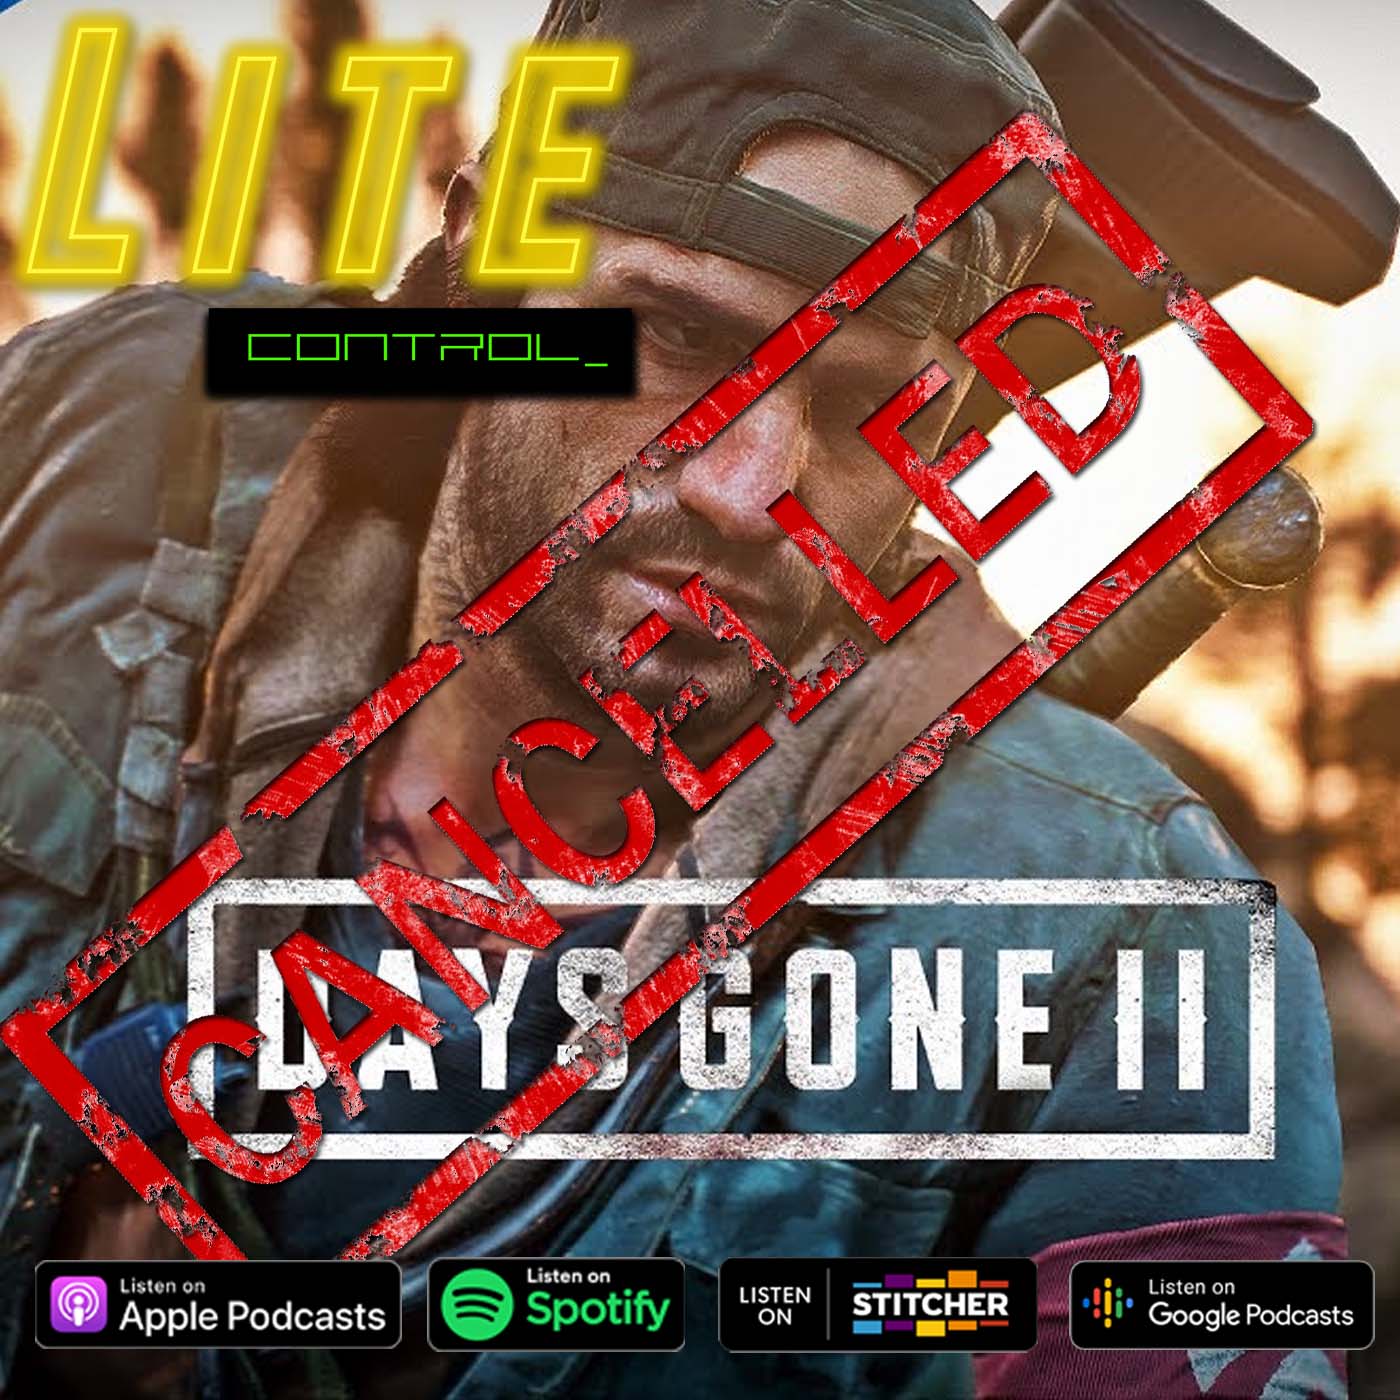 Lite Control 17.83 - Sony reportedly rejected plans for Days Gone 2